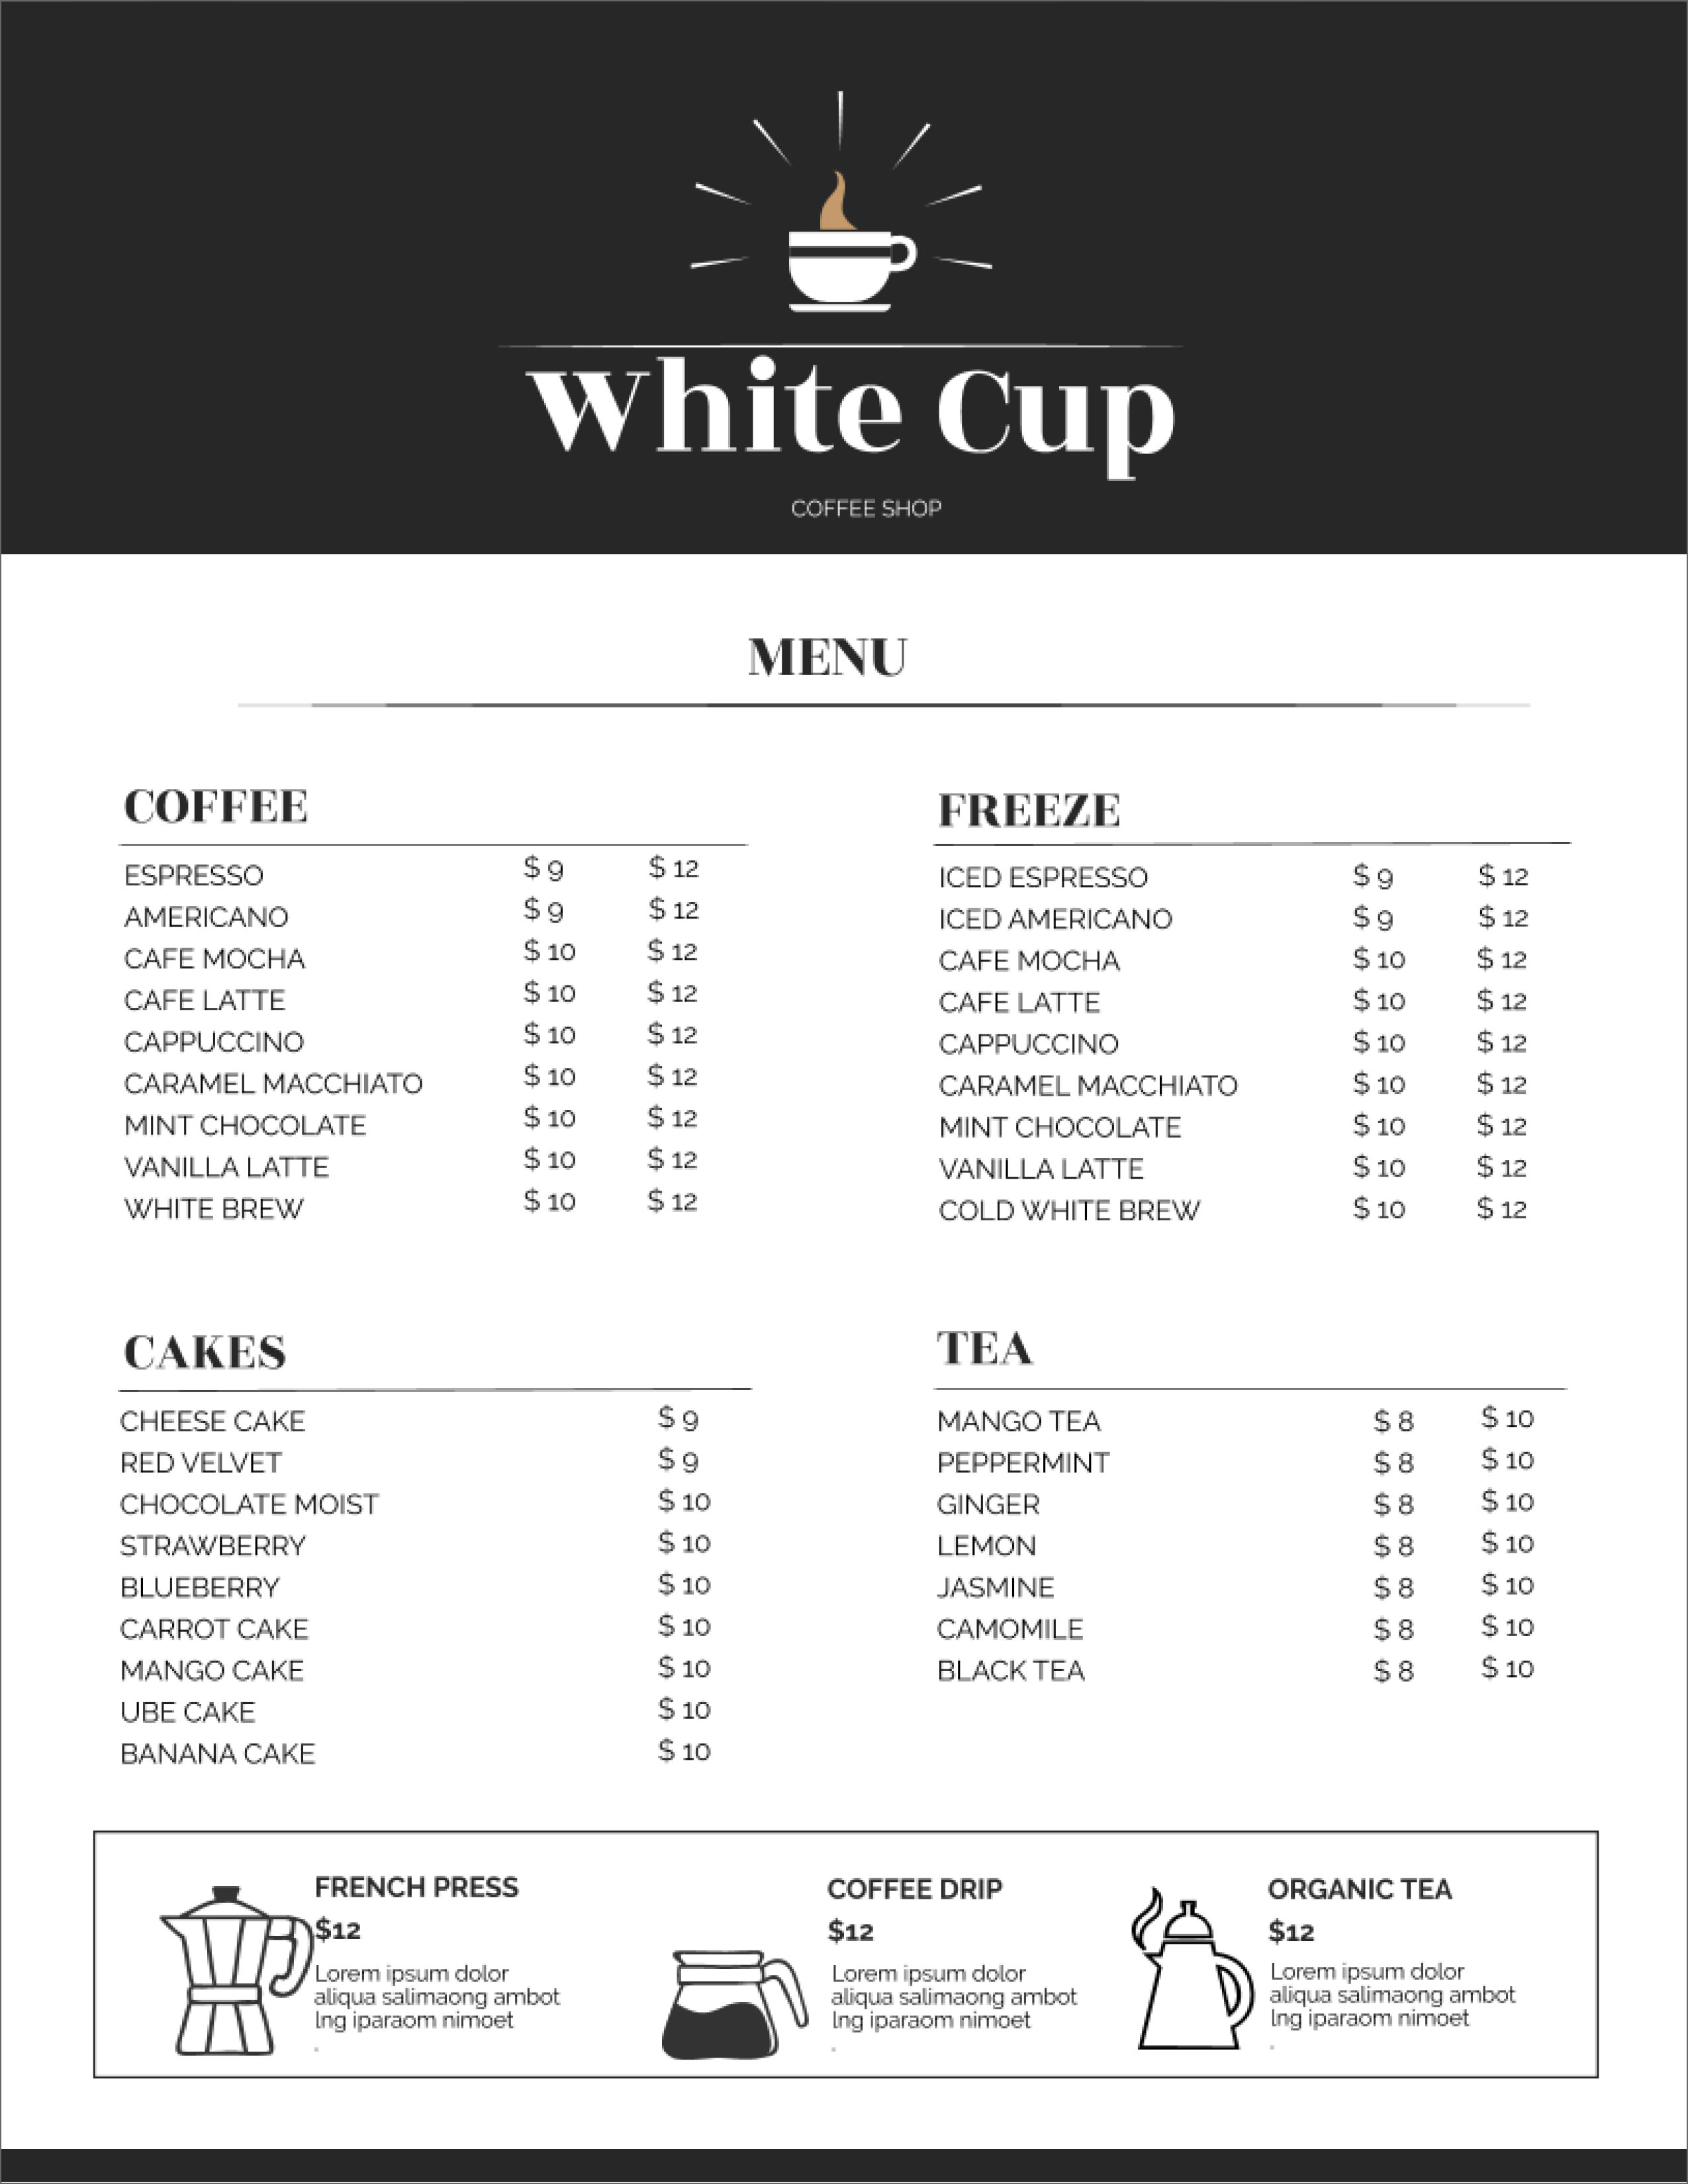 20 Free Simple Menu Templates For Restaurants, Cafes, And Parties With Google Docs Menu Template